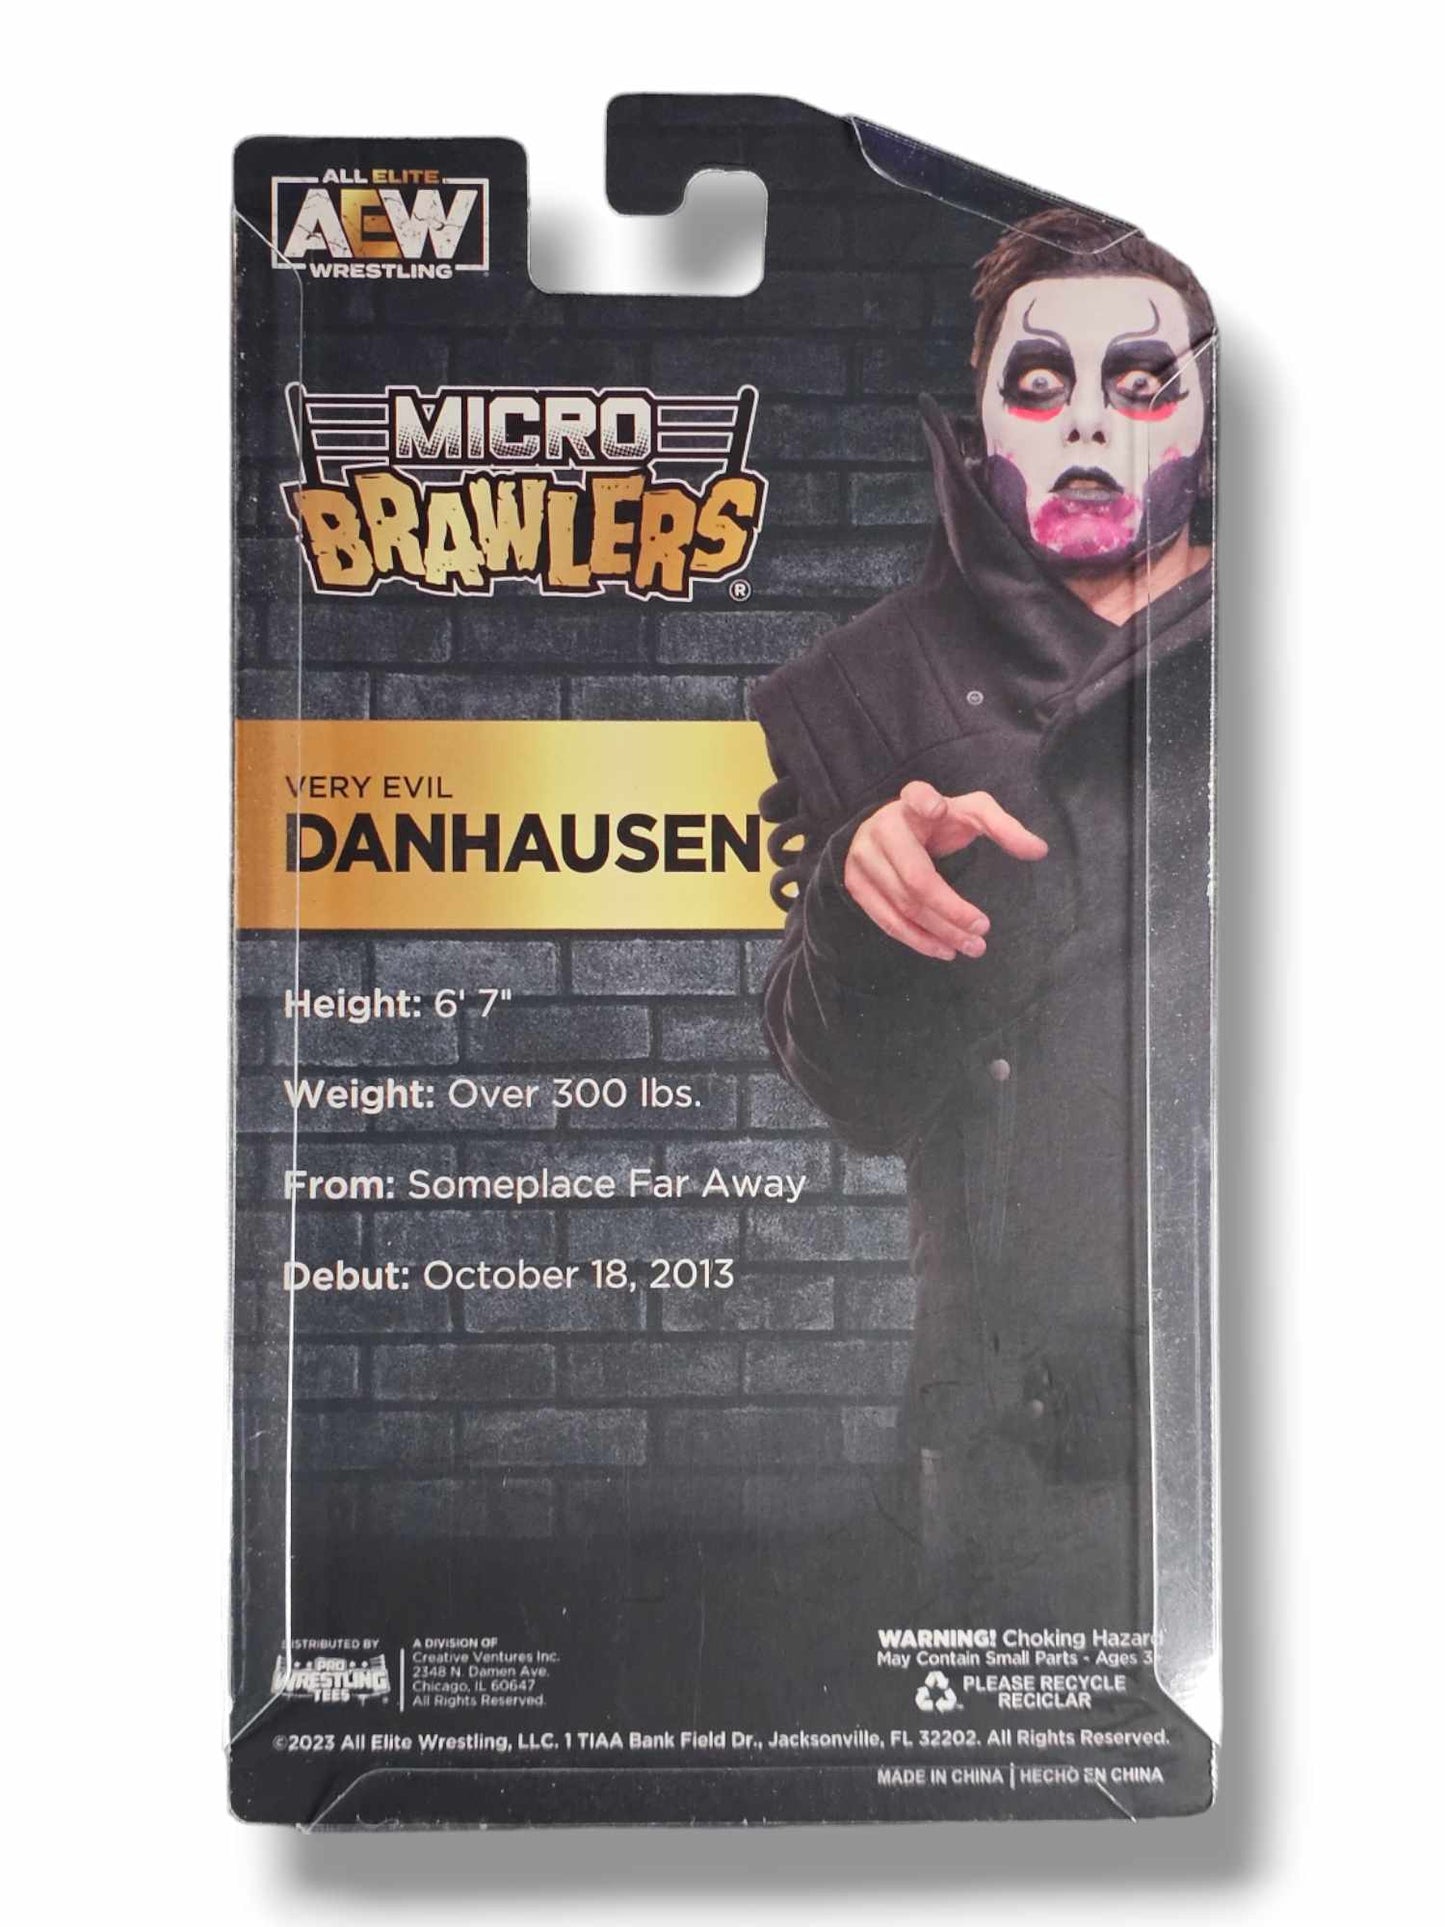 Pro Wrestling Tees on X: Pre-Order Now! AEW Micro Brawler - Danhausen  (Very Evil) 100 random orders will receive a Chase Variant. Available for 2  Weeks Only. 🦷🦷🦷 Link-  @DanhausenAD @ShopAEW @